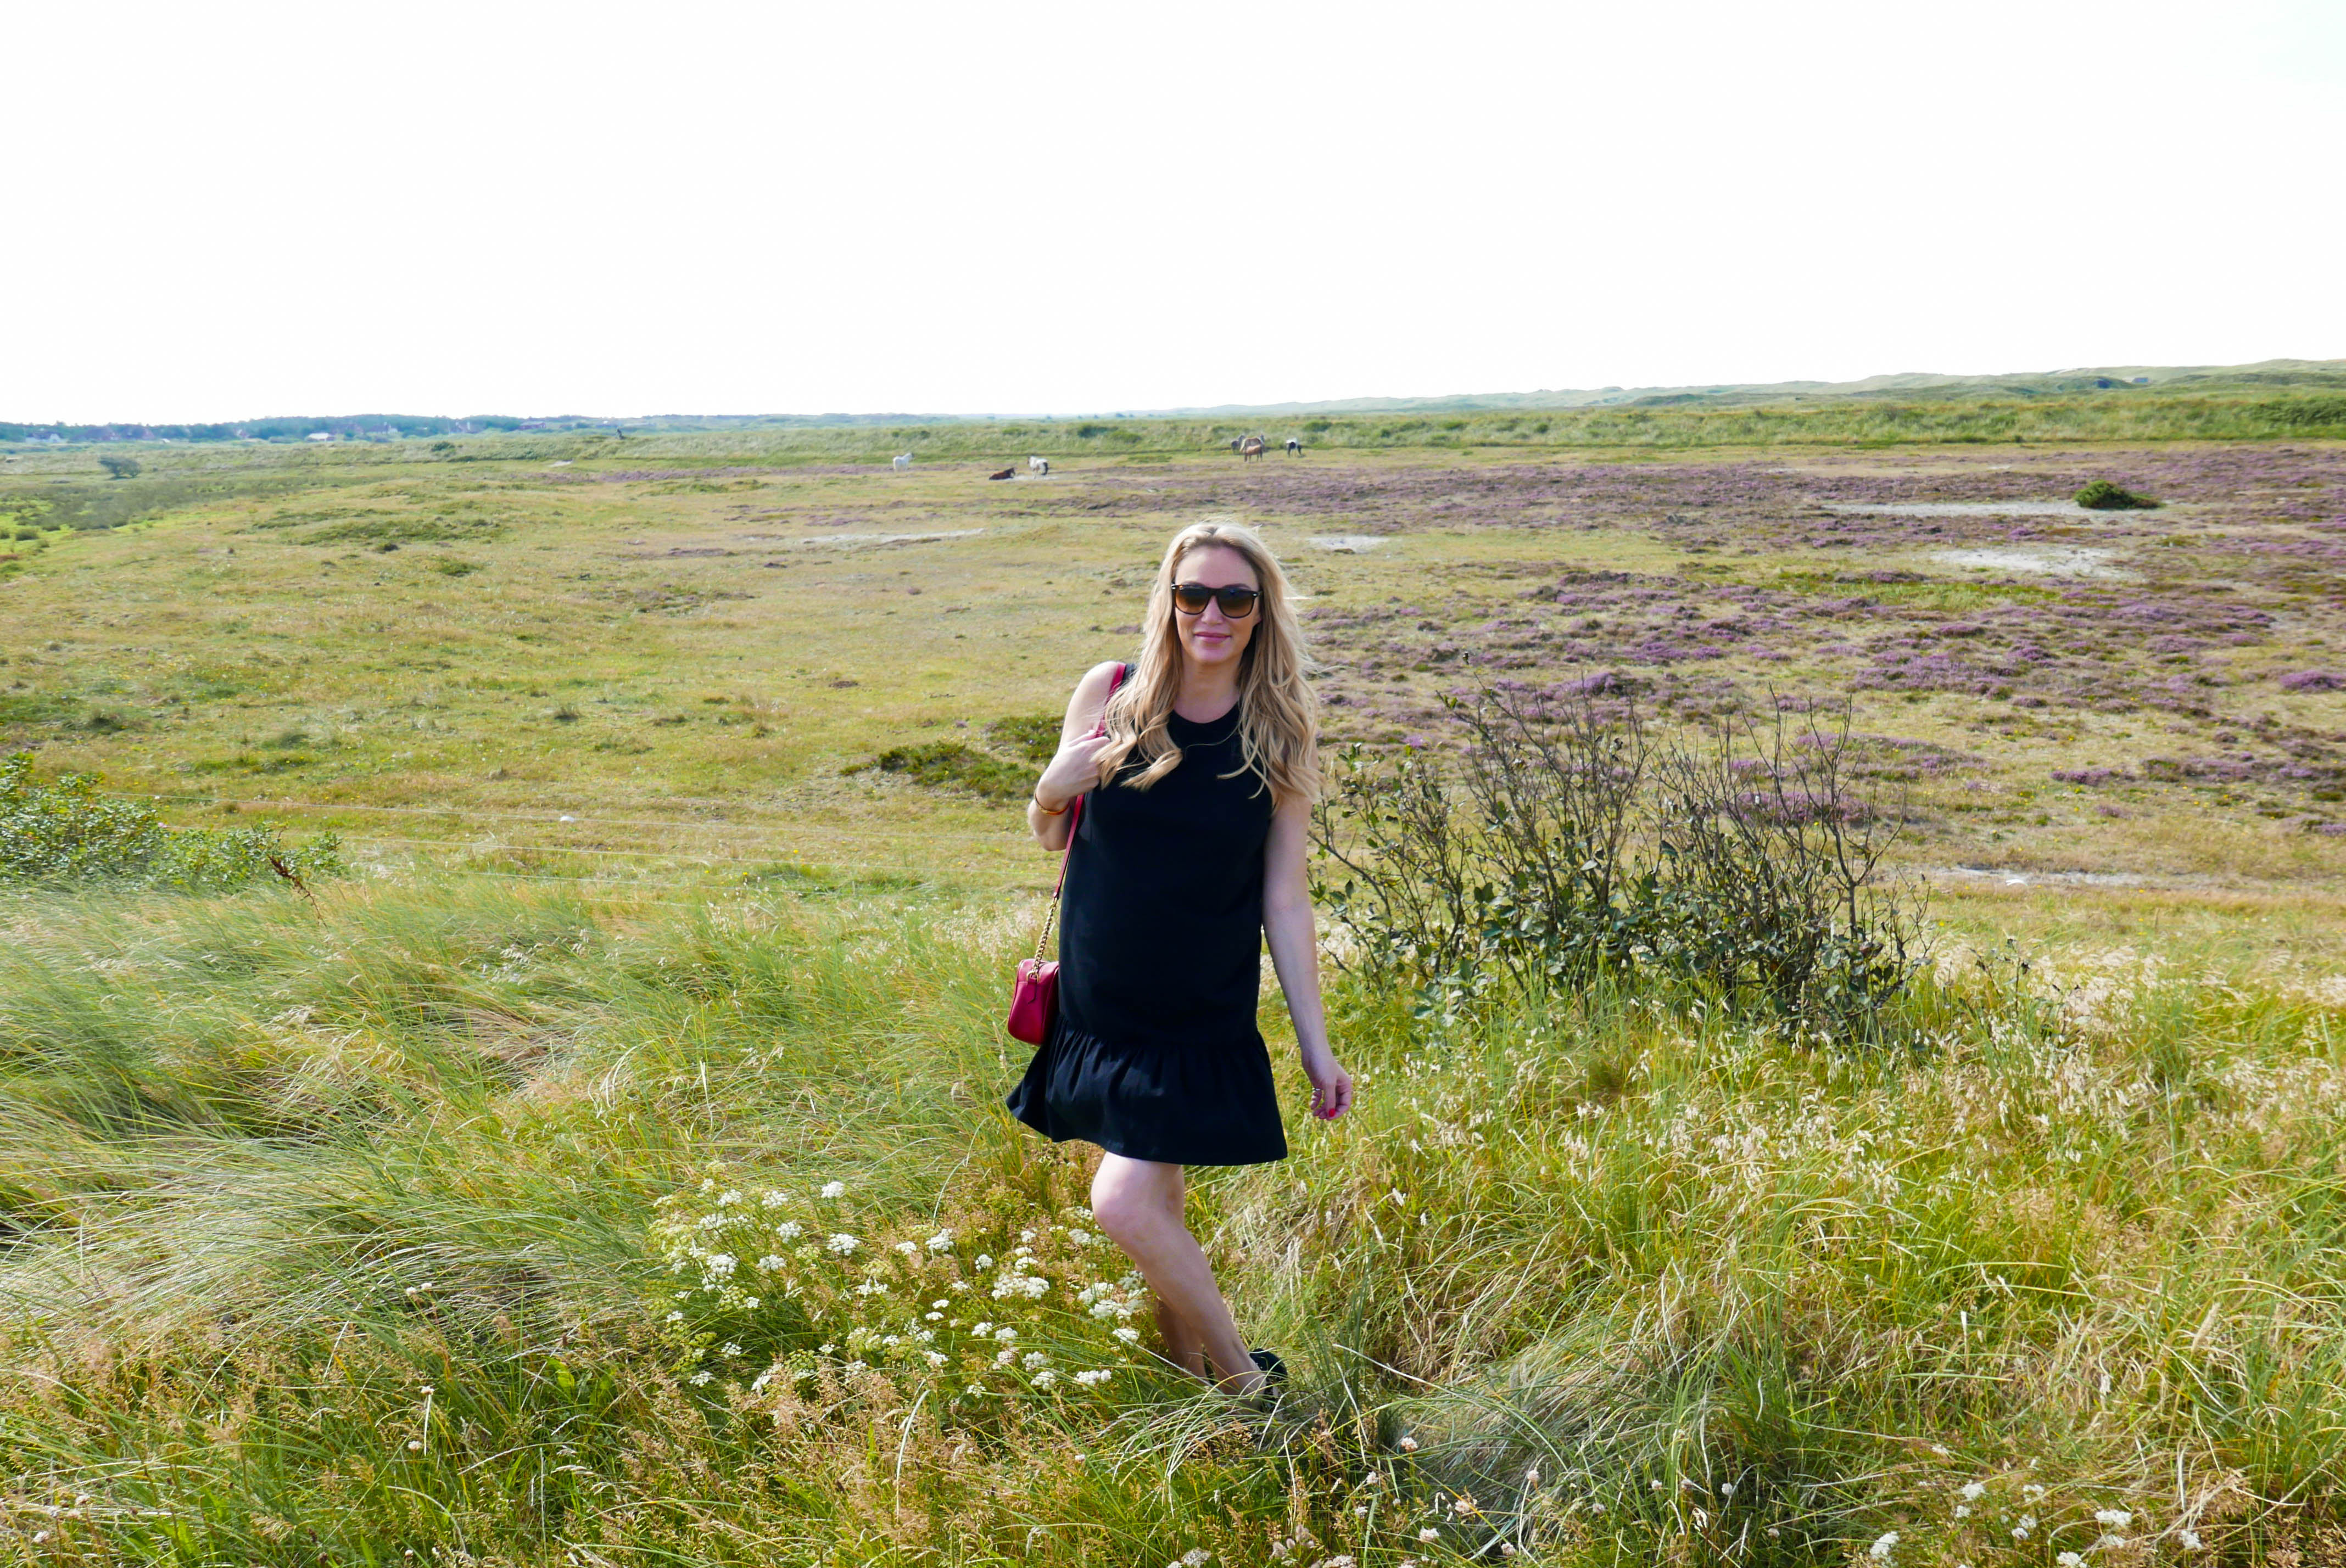 Going back to my roots – a visit to Denmark’s beautiful countryside